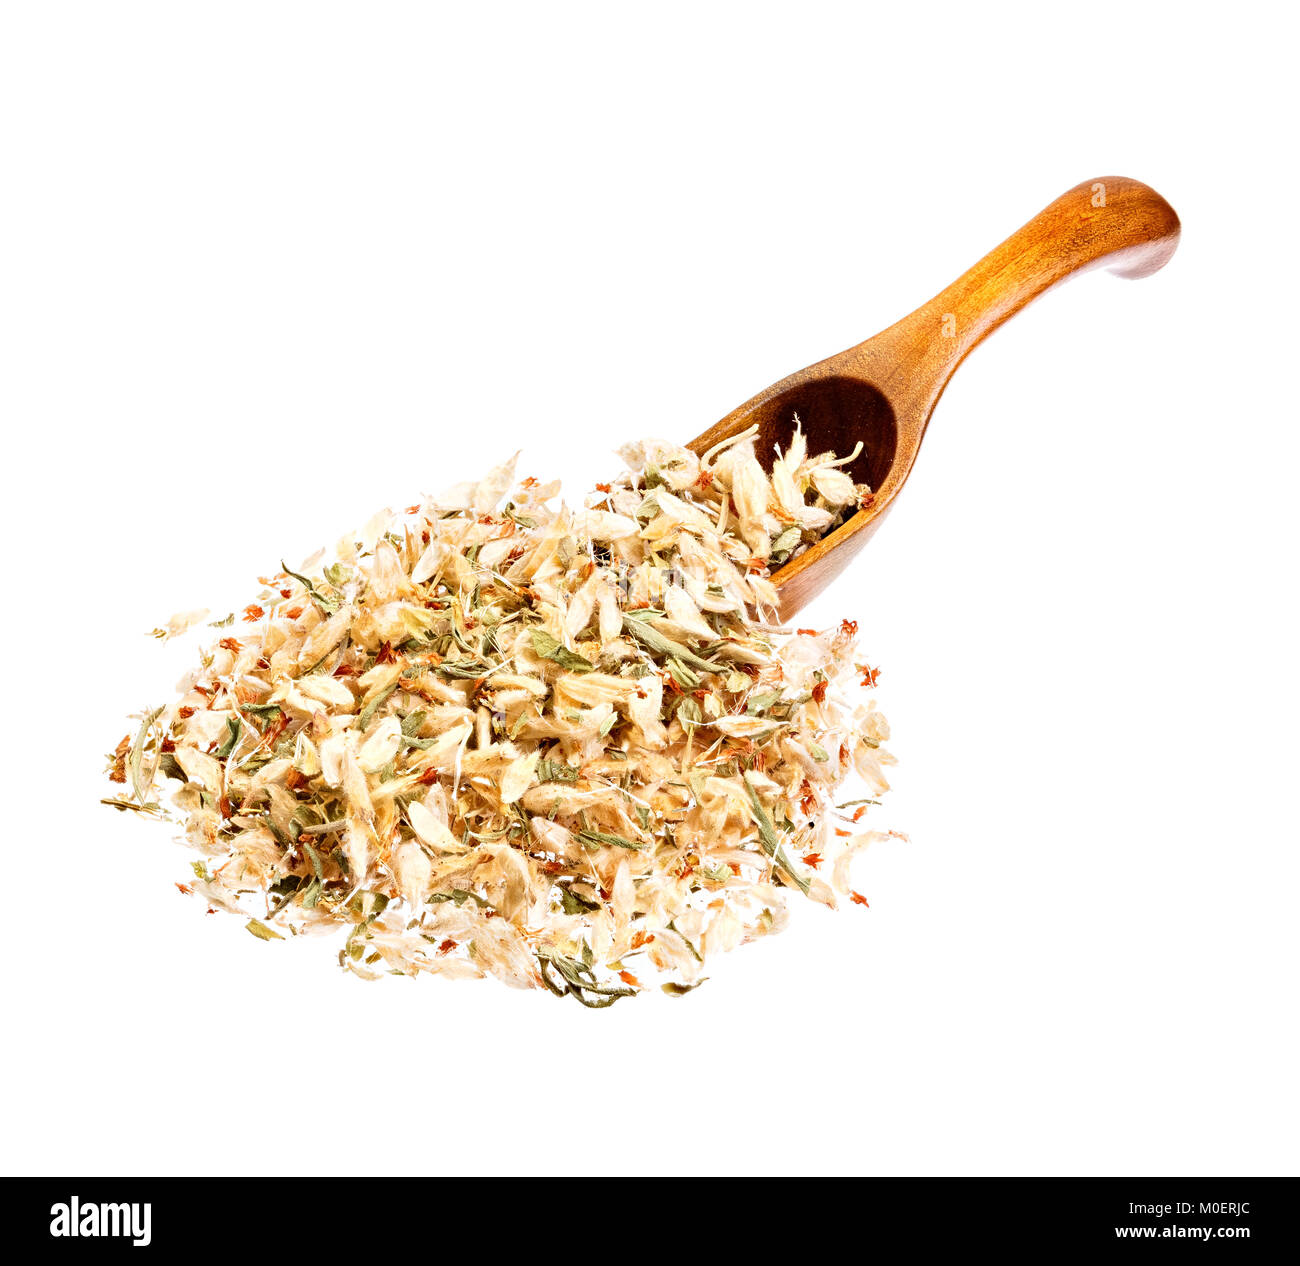 Flowers of Astragalus root on the wooden spoon. Stock Photo